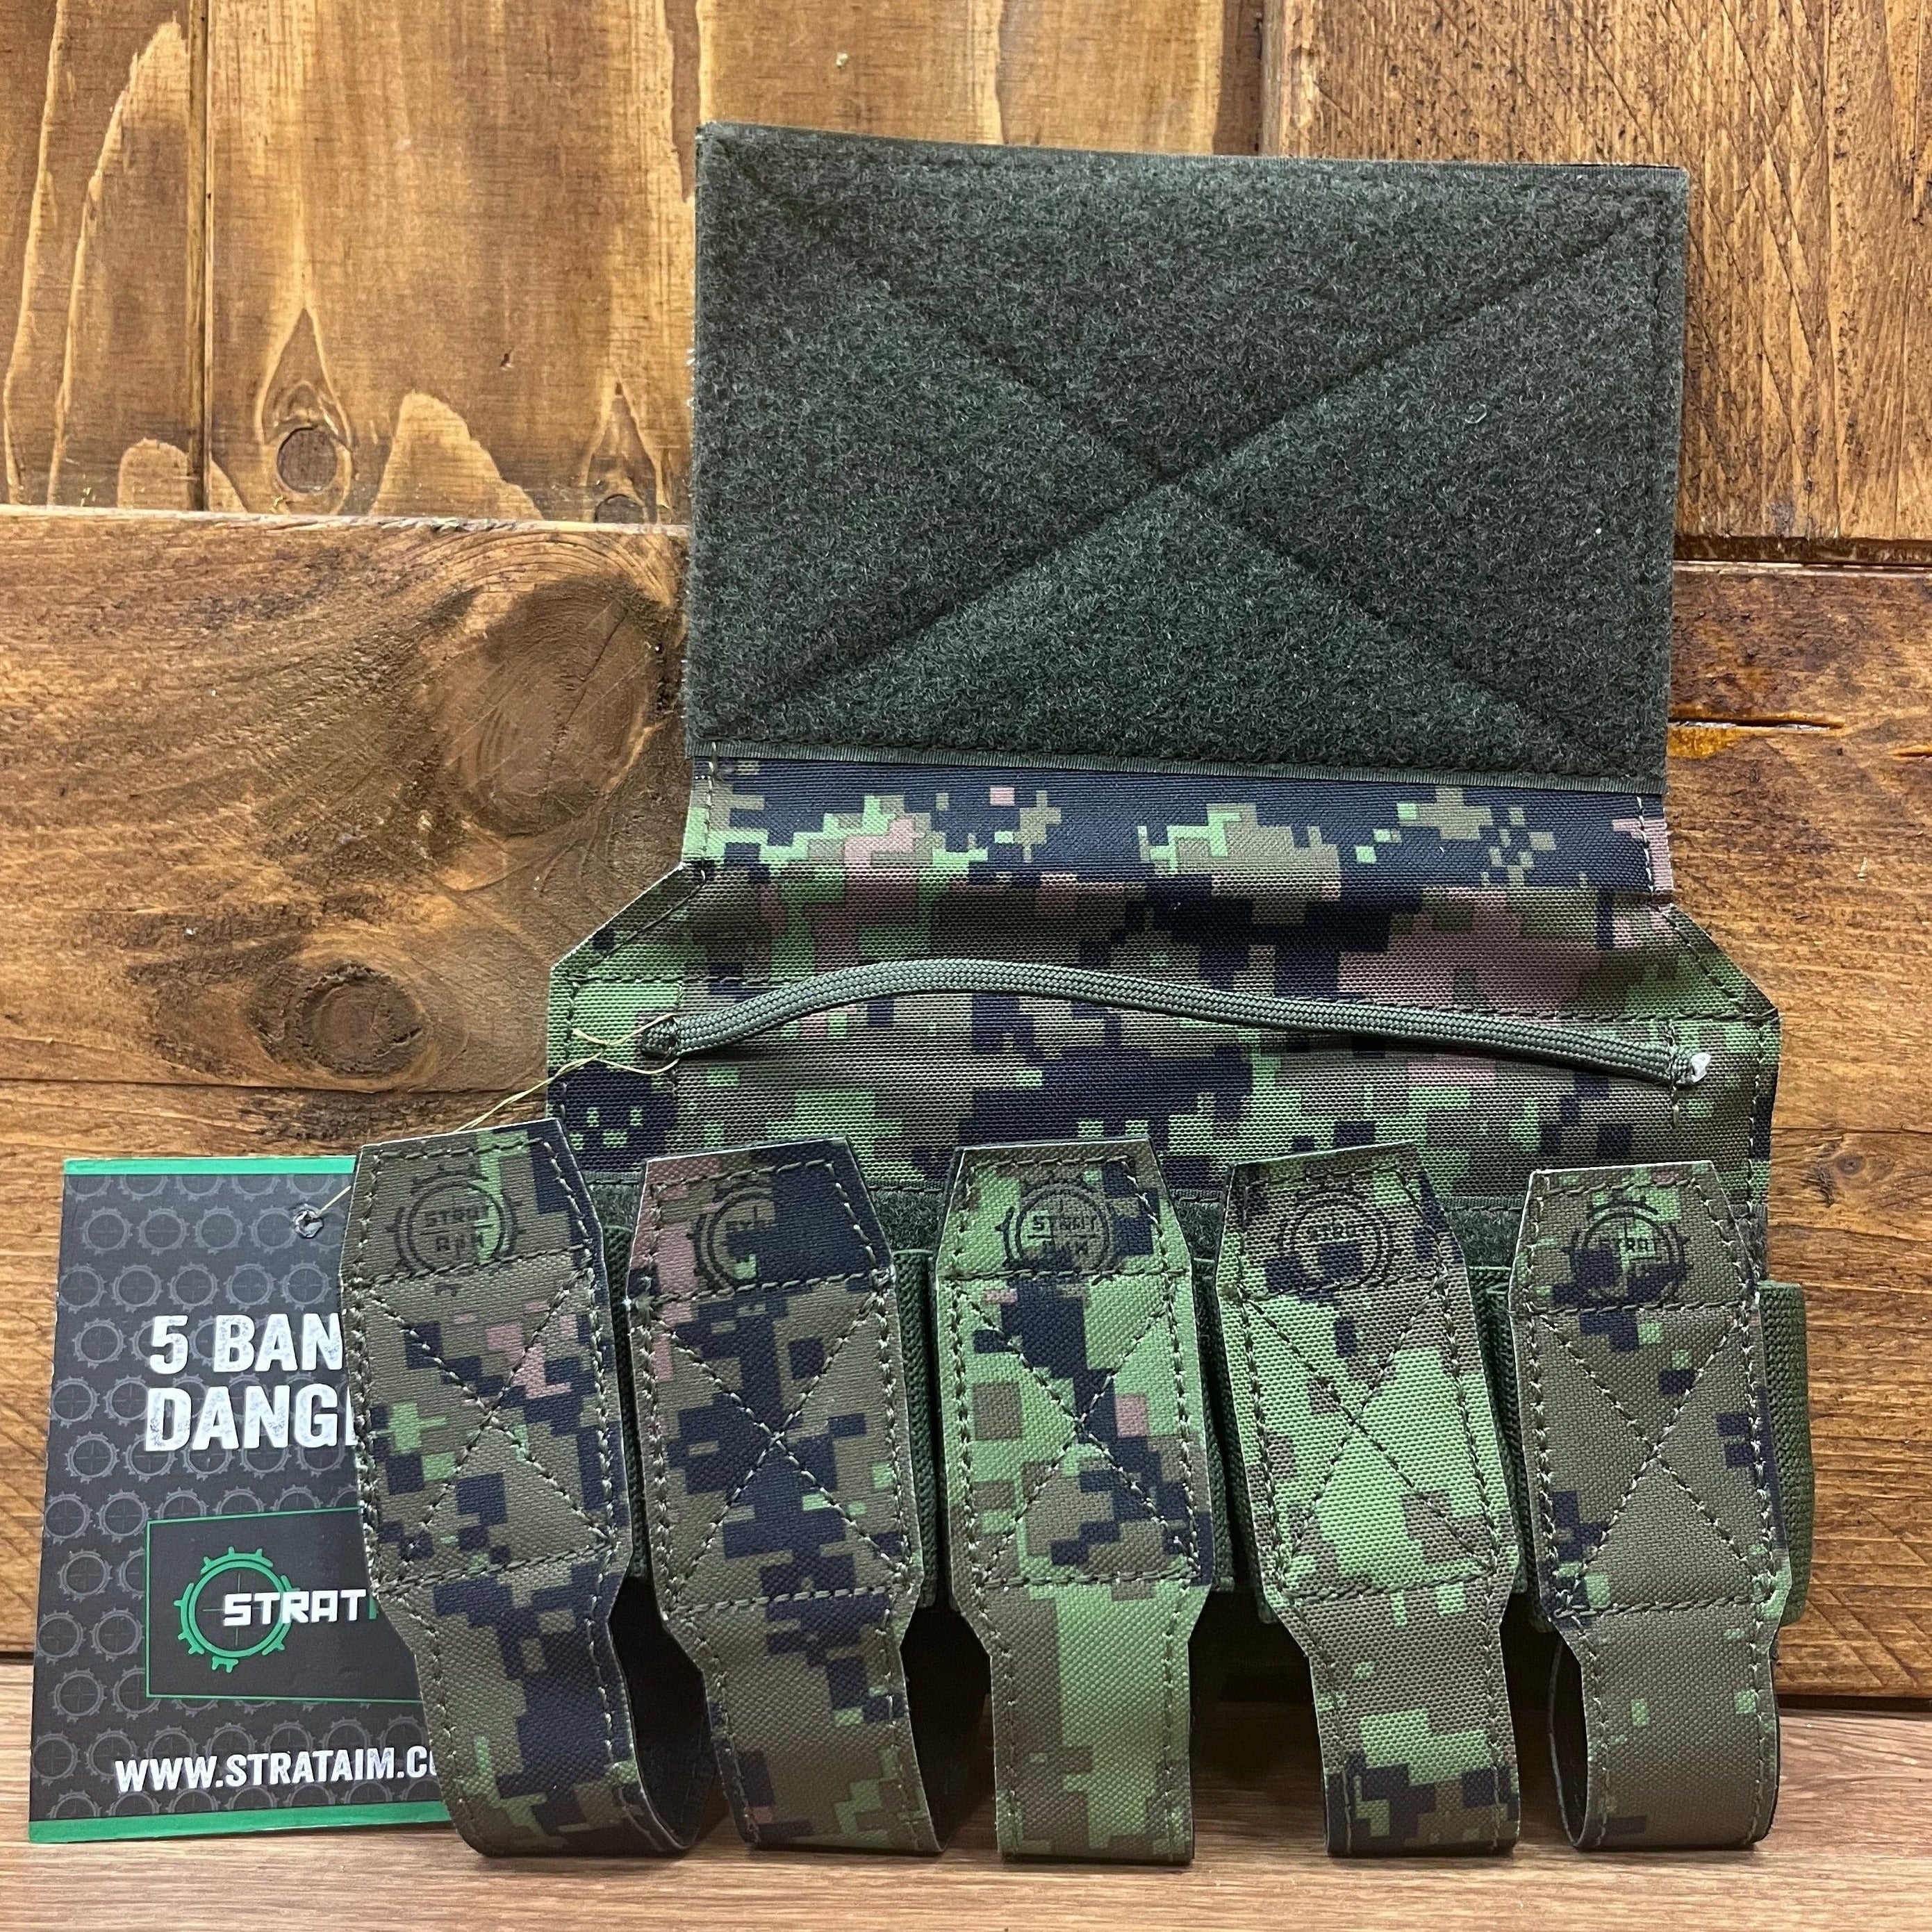 Fully loaded 5 Banger Dangler Grenade Pouch, ready for any mission